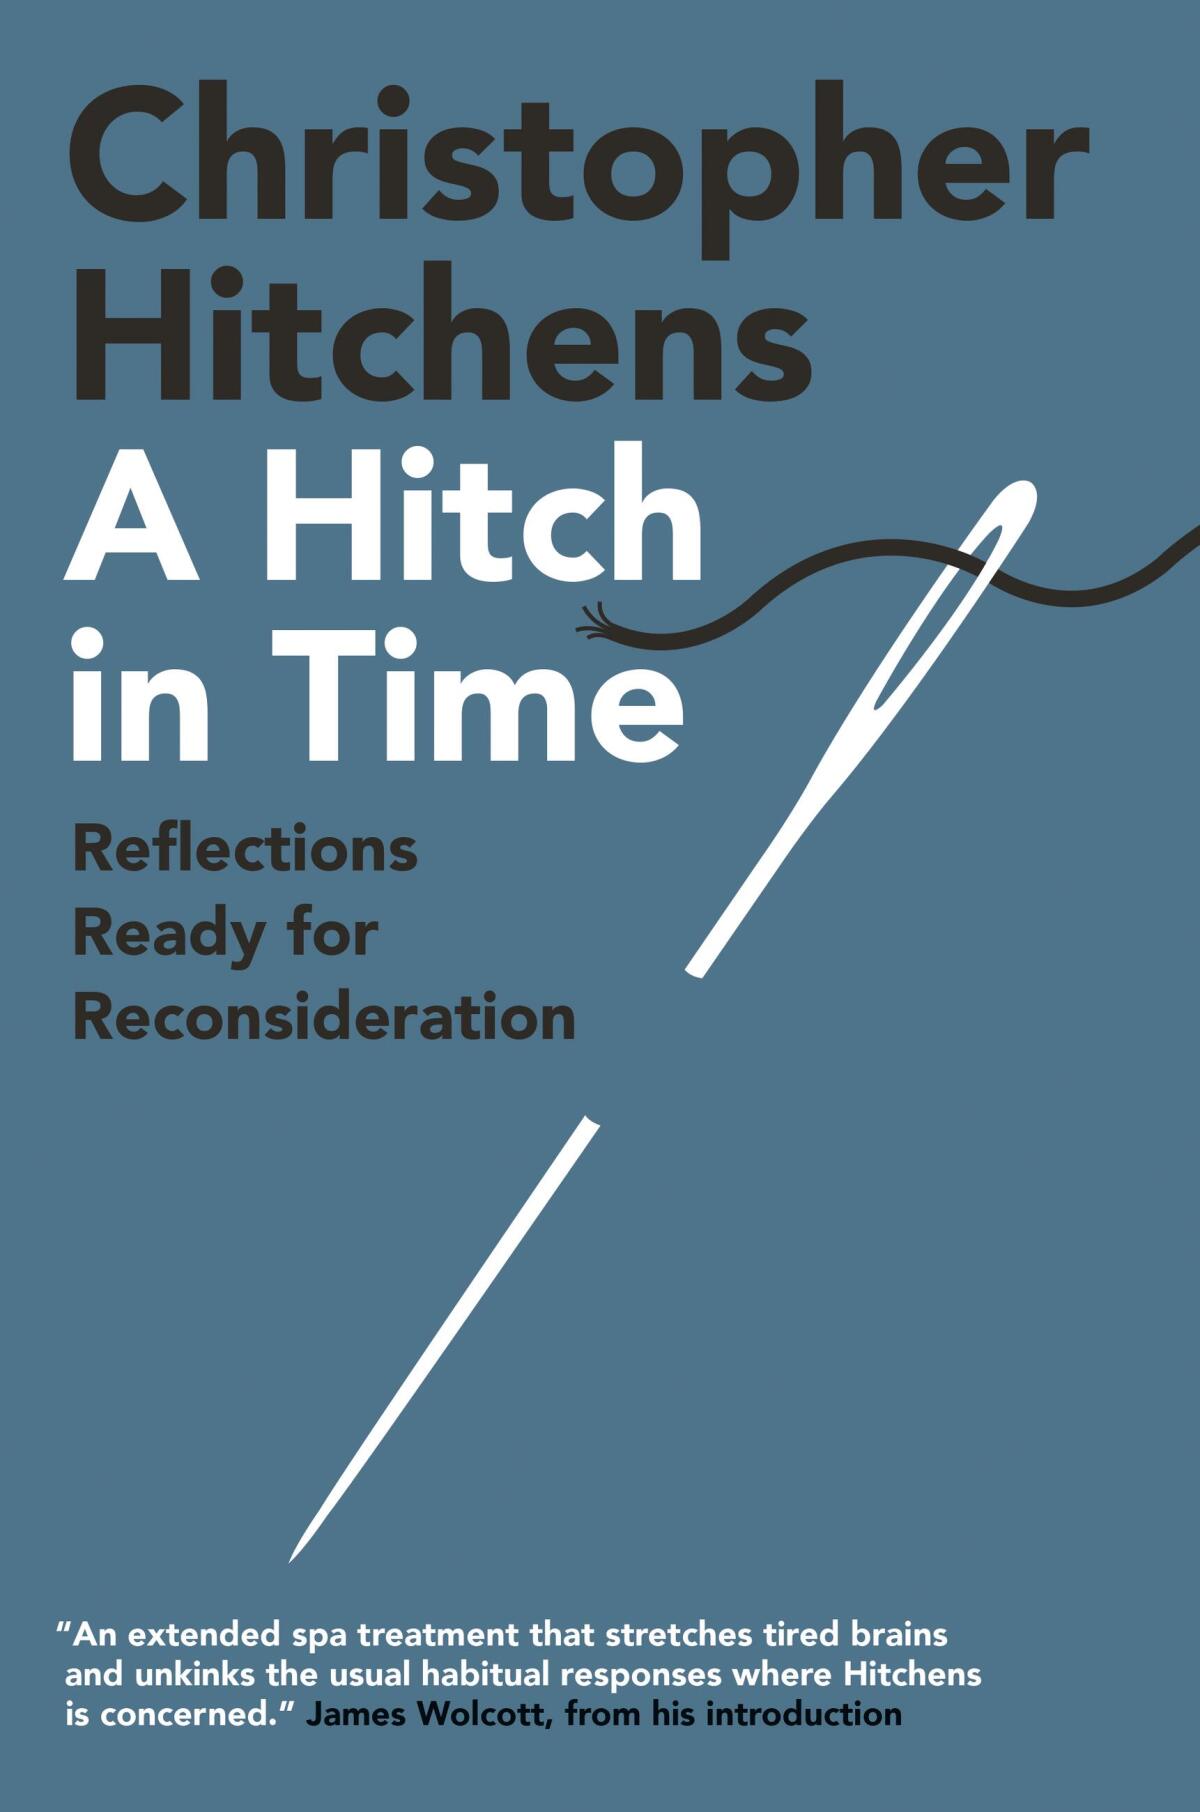 "A Hitch in Time," by Christopher Hitchens